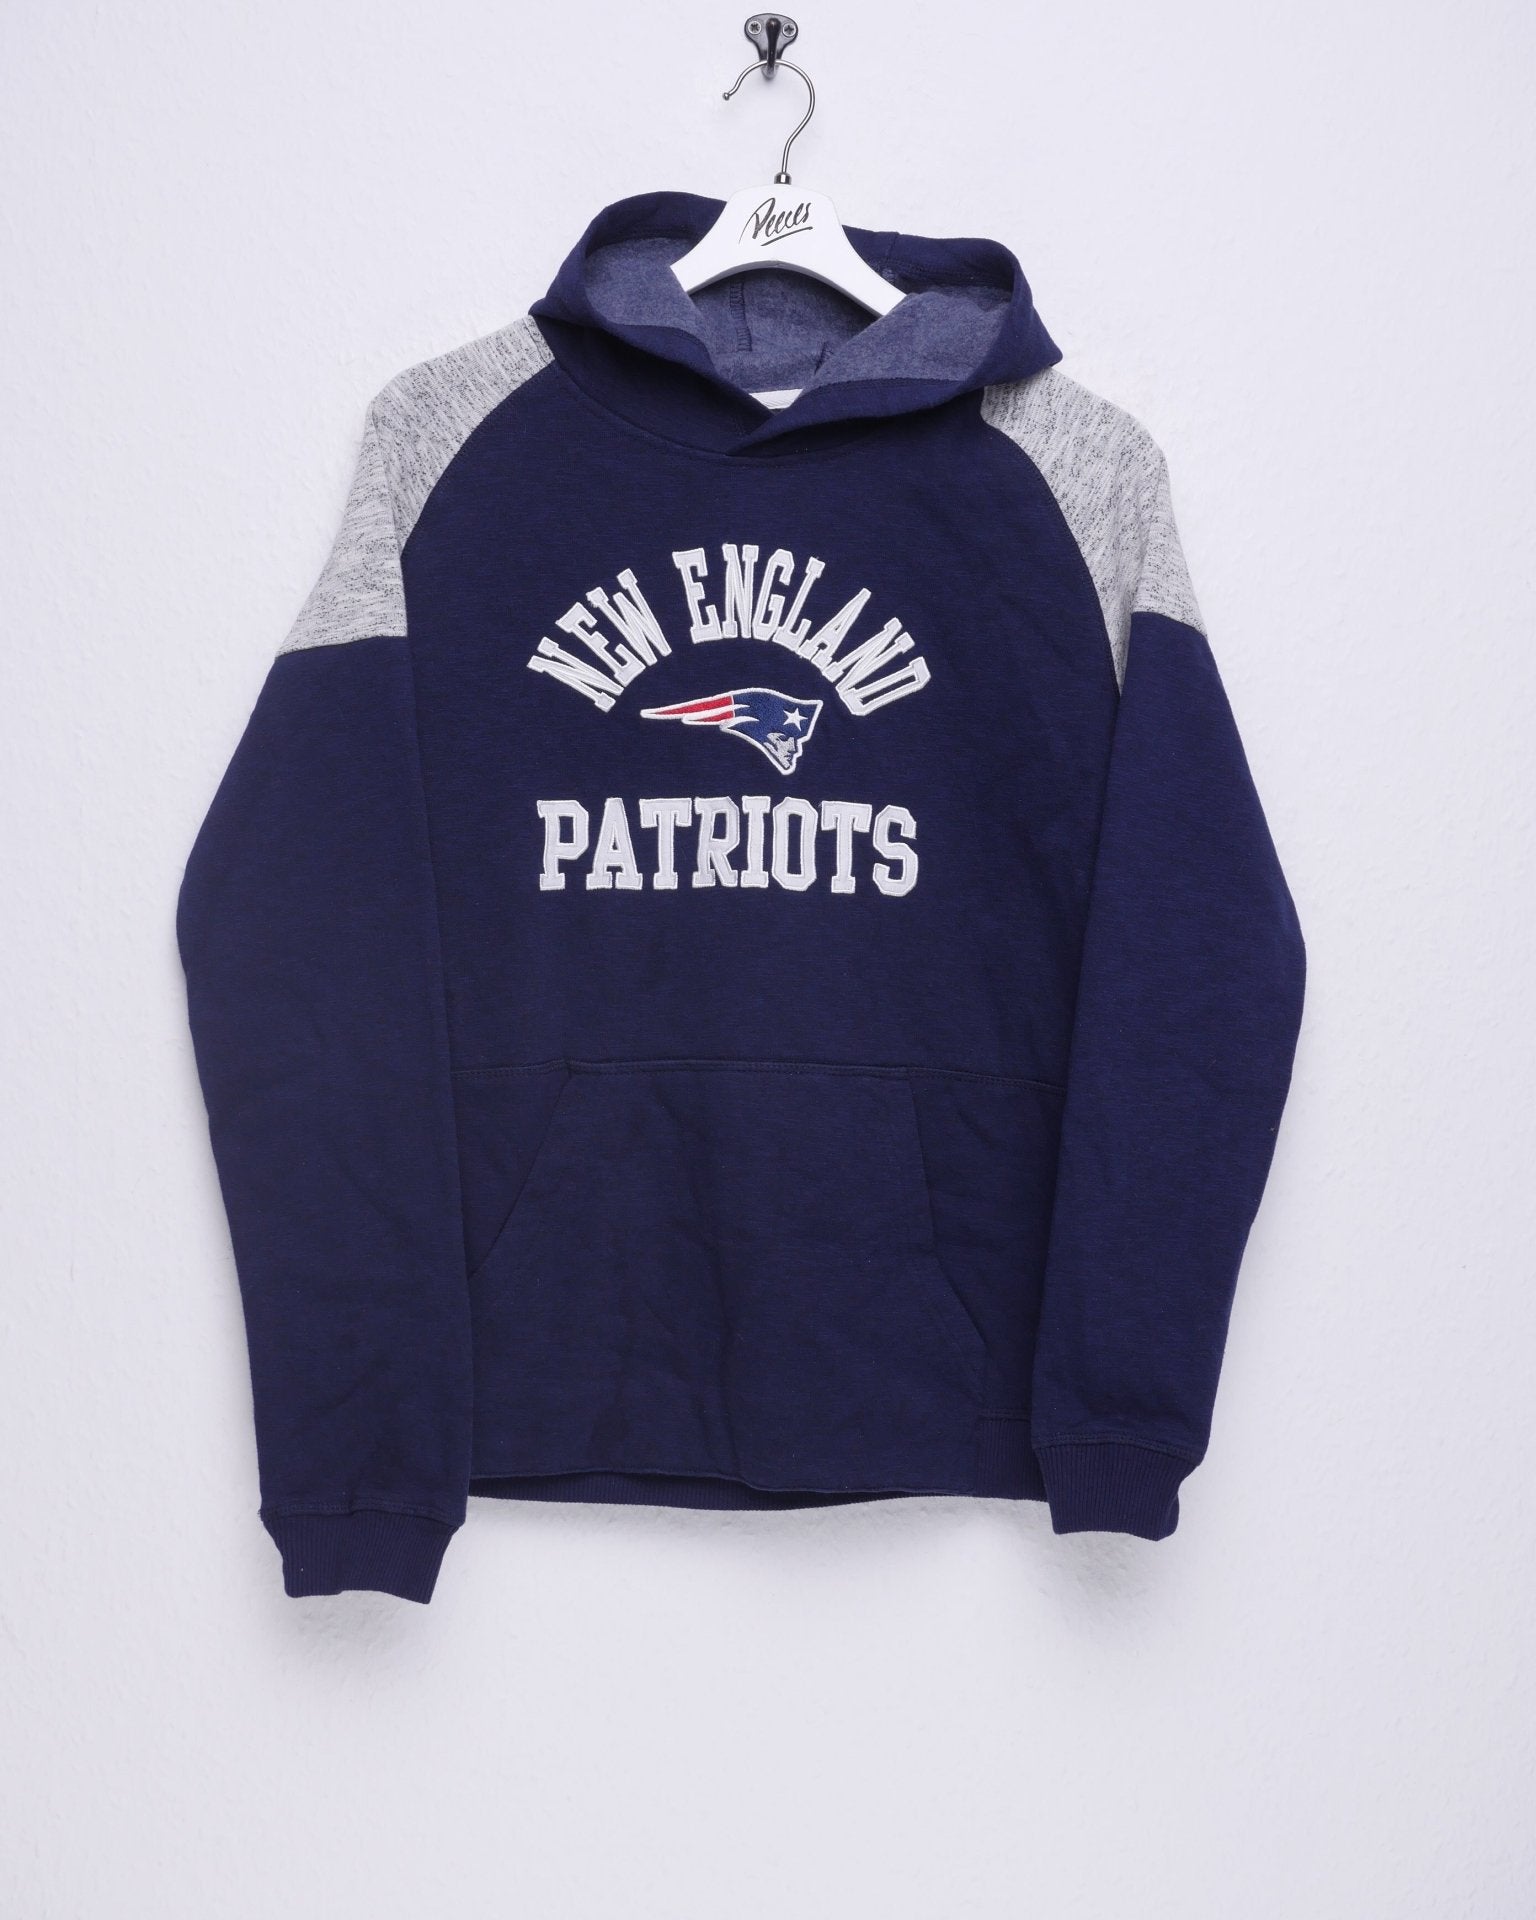 NFL embroidered 'New England Patriots' Spellout Vintage Hoodie - Peeces